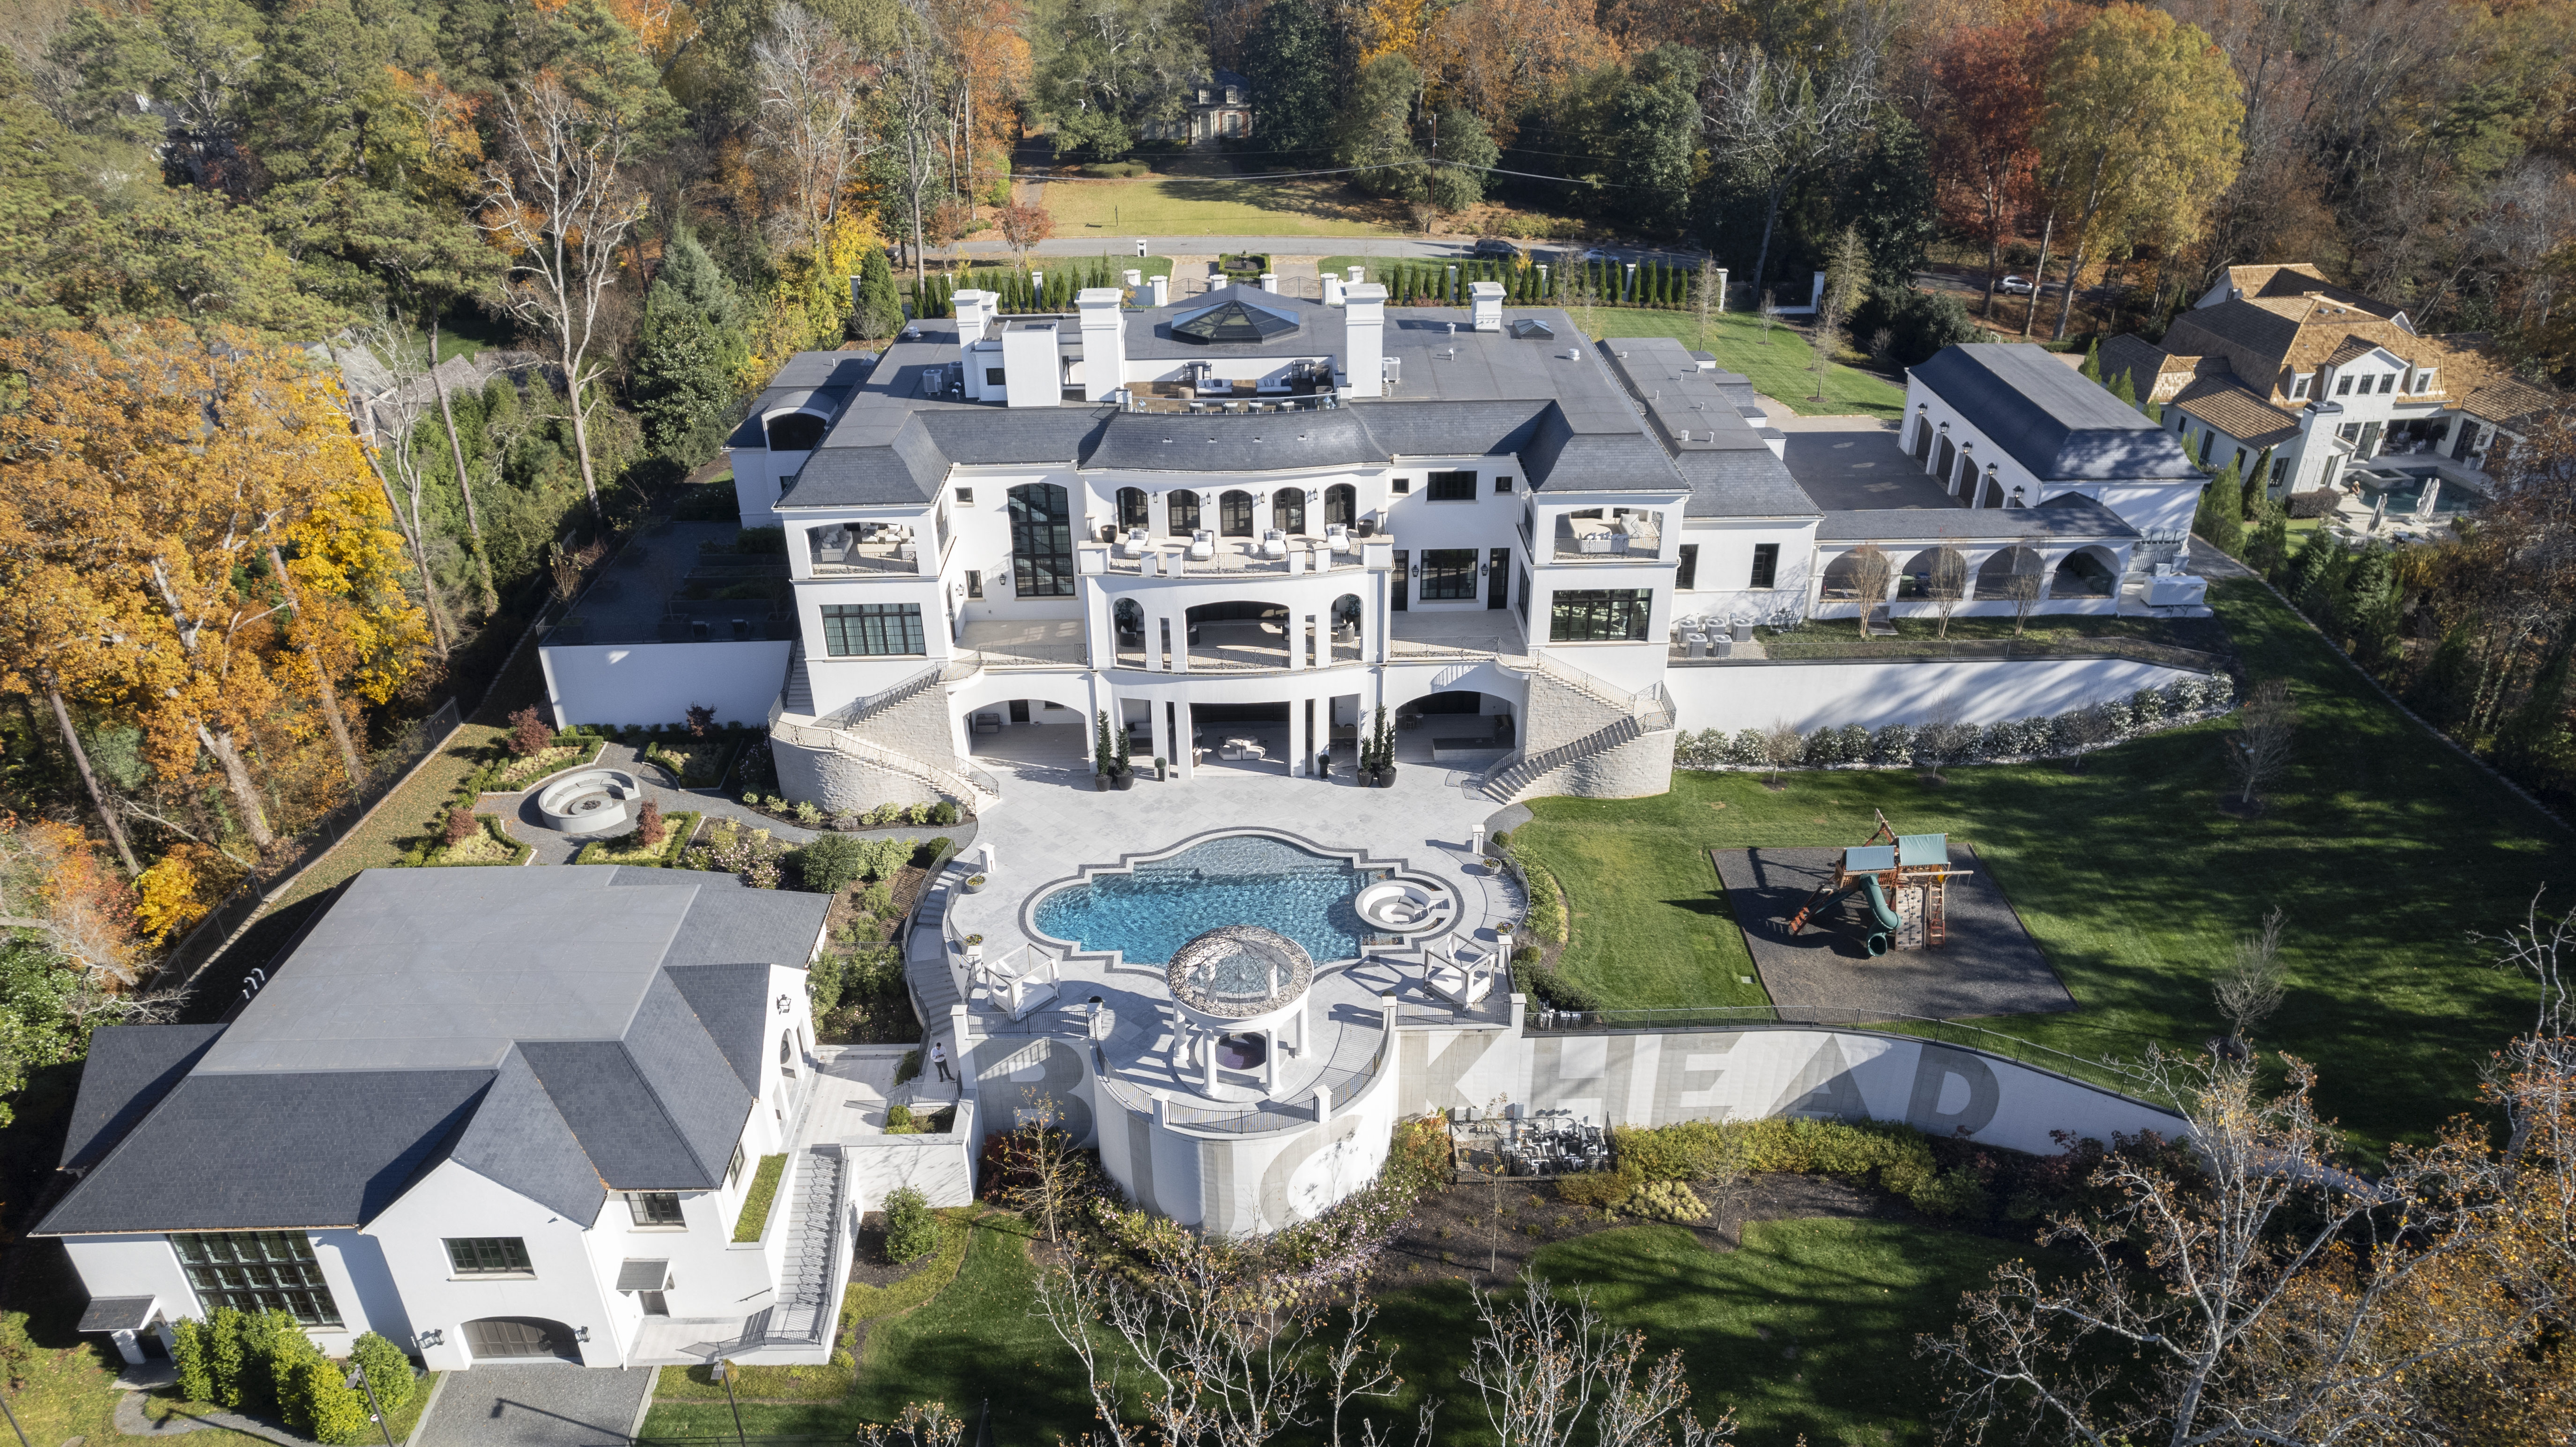 PHOTOS: This $35 million Buckhead home with a basketball court, gym and  batting cage just hit the market – WSB-TV Channel 2 - Atlanta